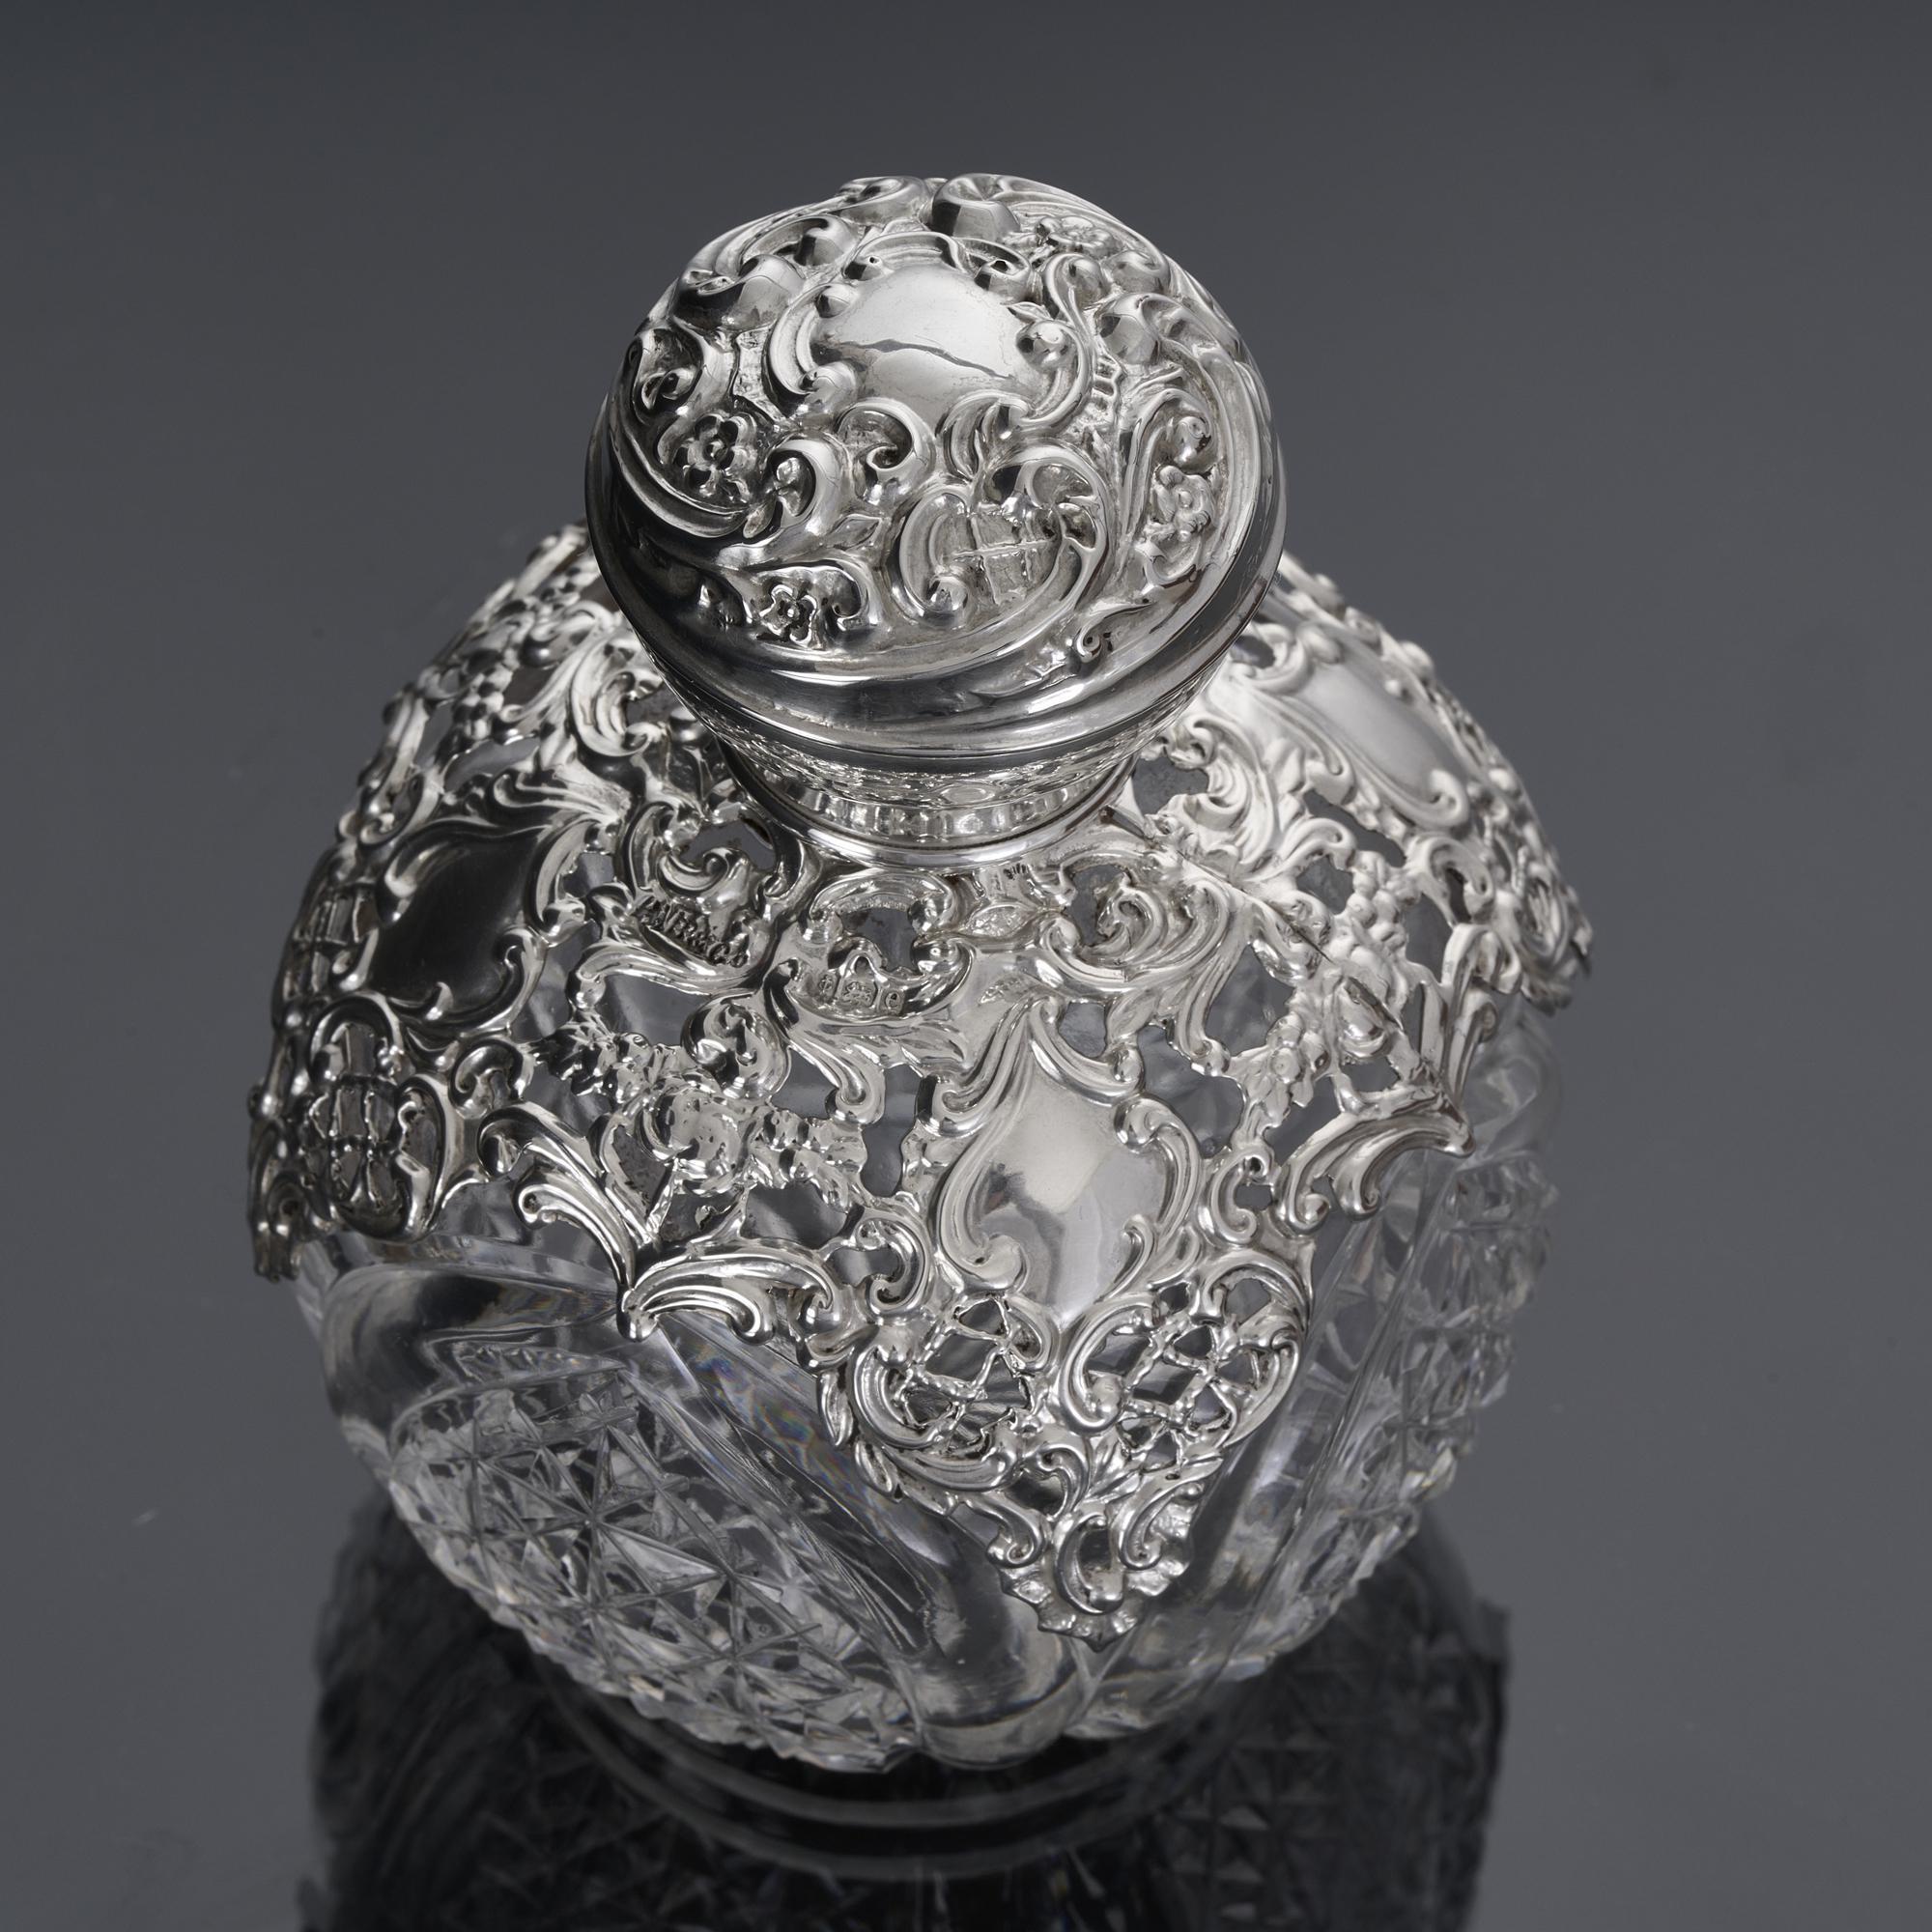 Antique cut glass globe perfume bottle from the Edwardian era.  The round body is decorated with sections of hand cut diamond starburst patterns, and fitted with an open-work sterling silver apron and hand embossed silver pull-off cover. The